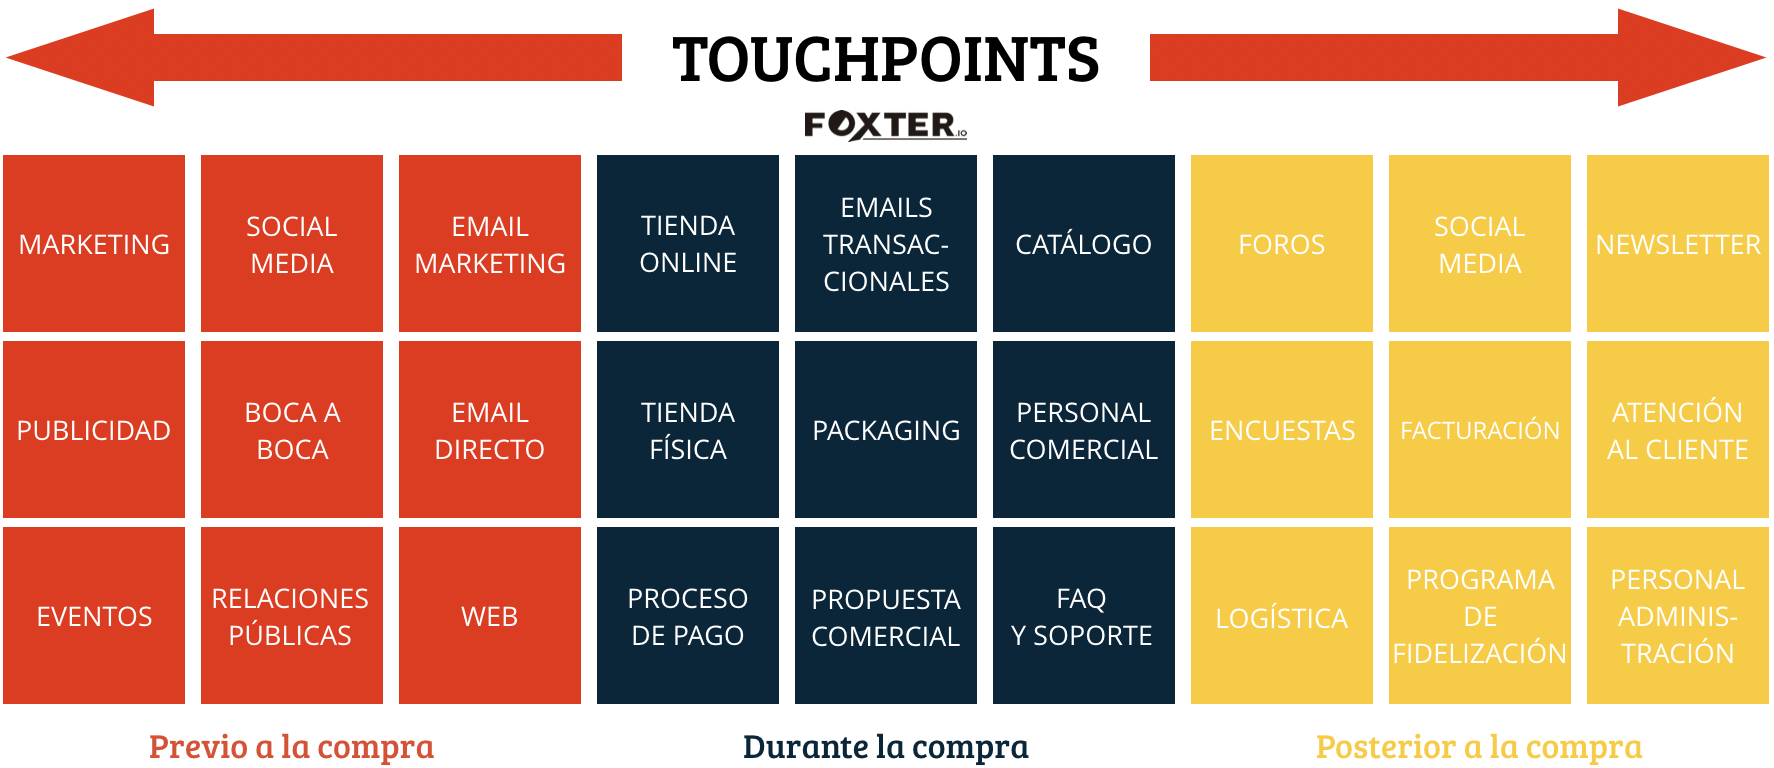 Customer Experience Touchpoints